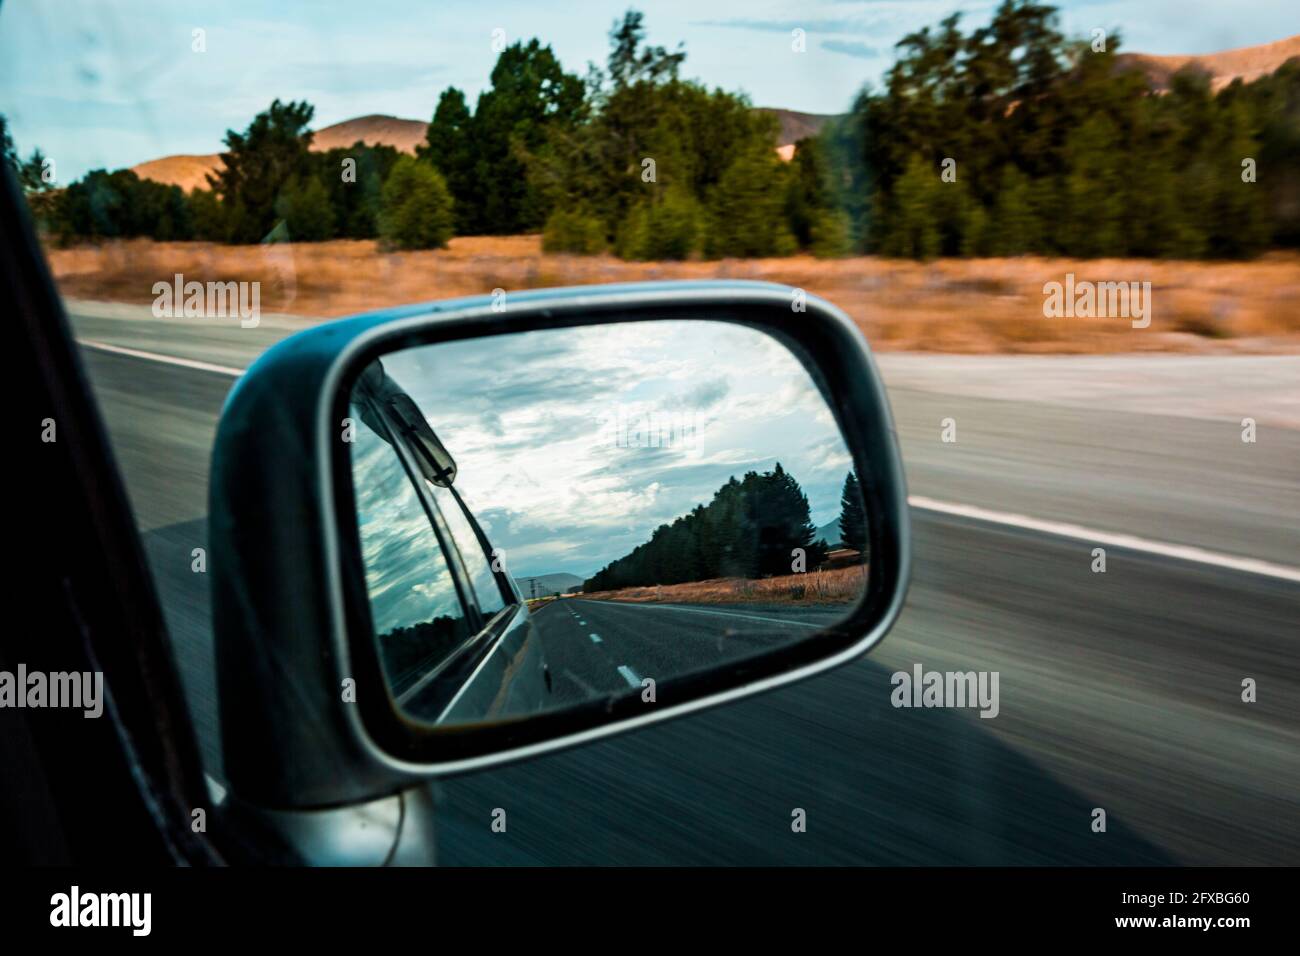 Side-view mirror reflection of car driving along State Highway 8 Stock Photo